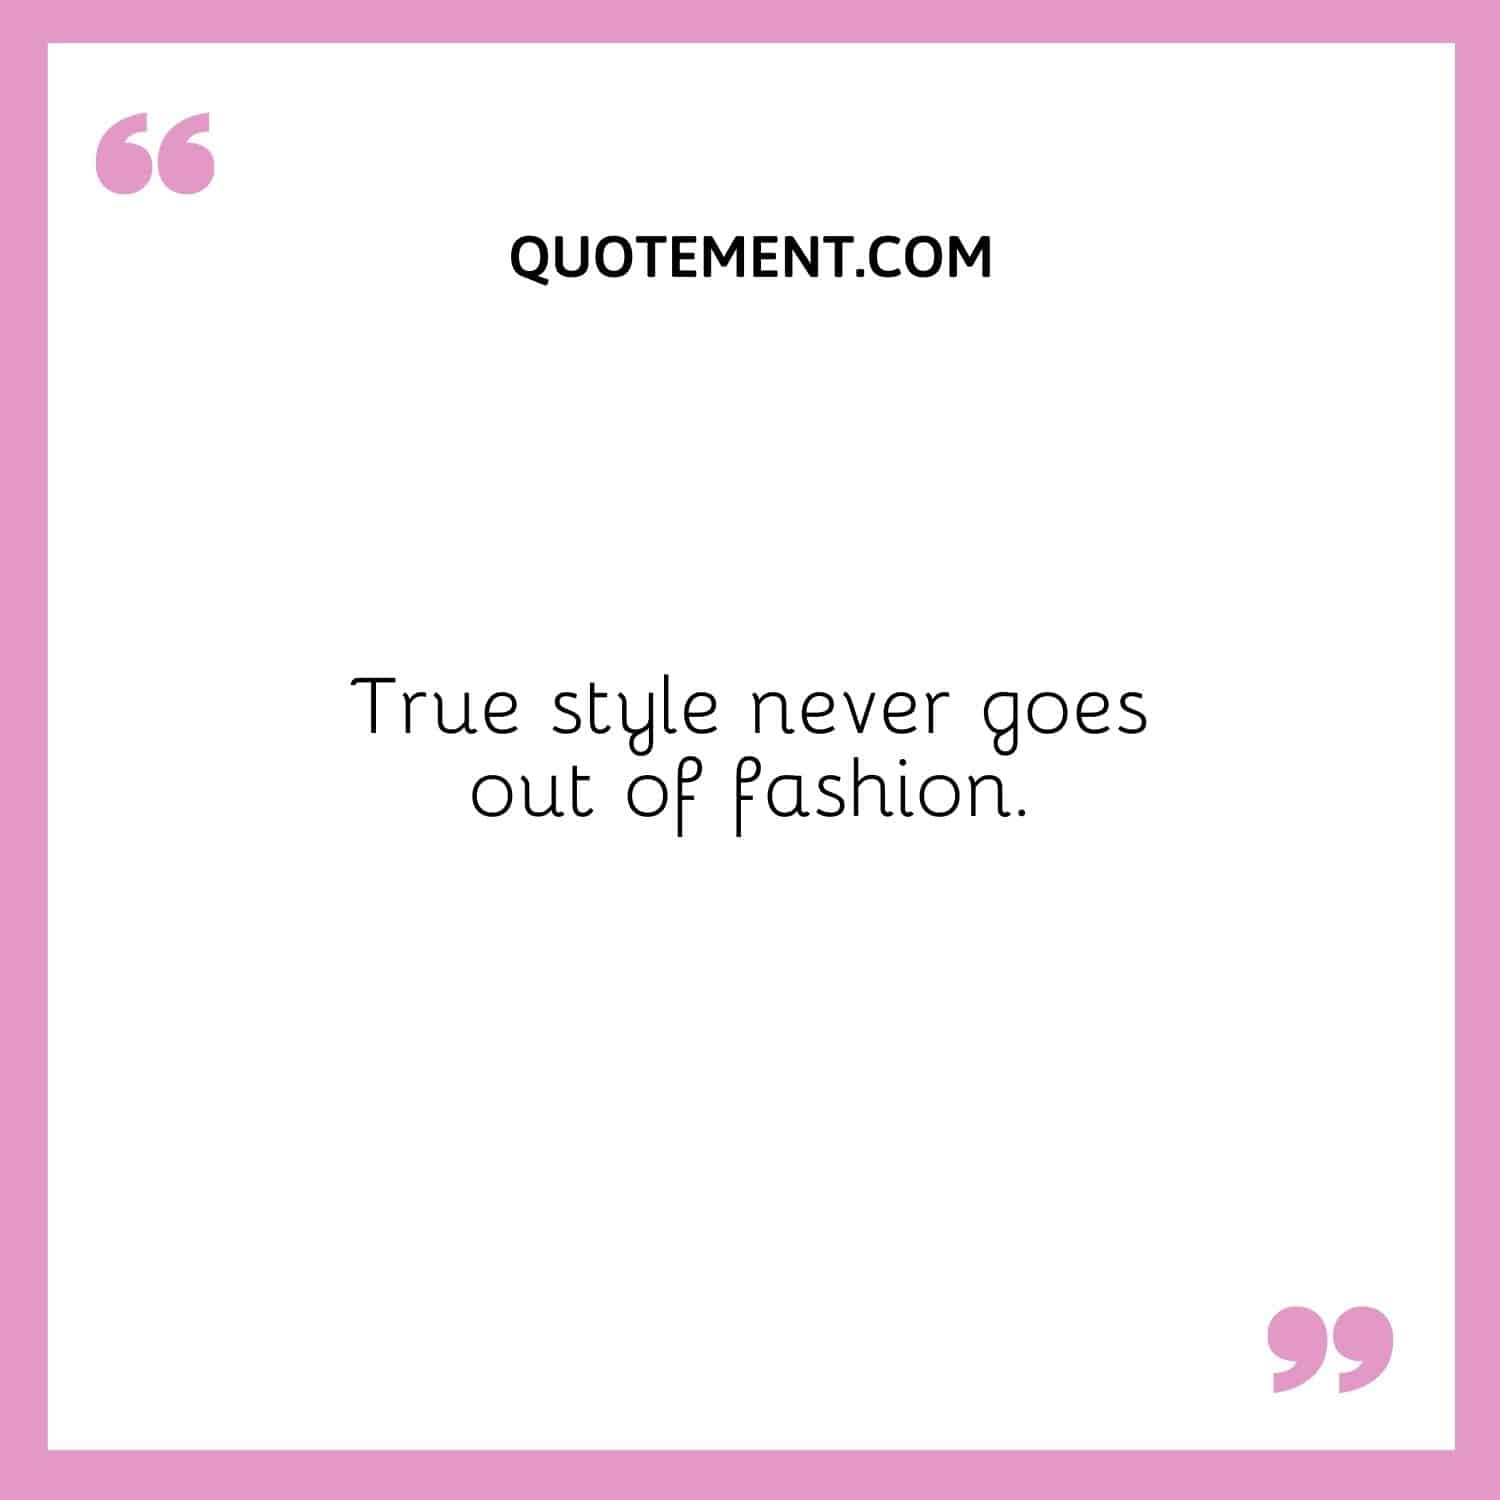 True style never goes out of fashion.